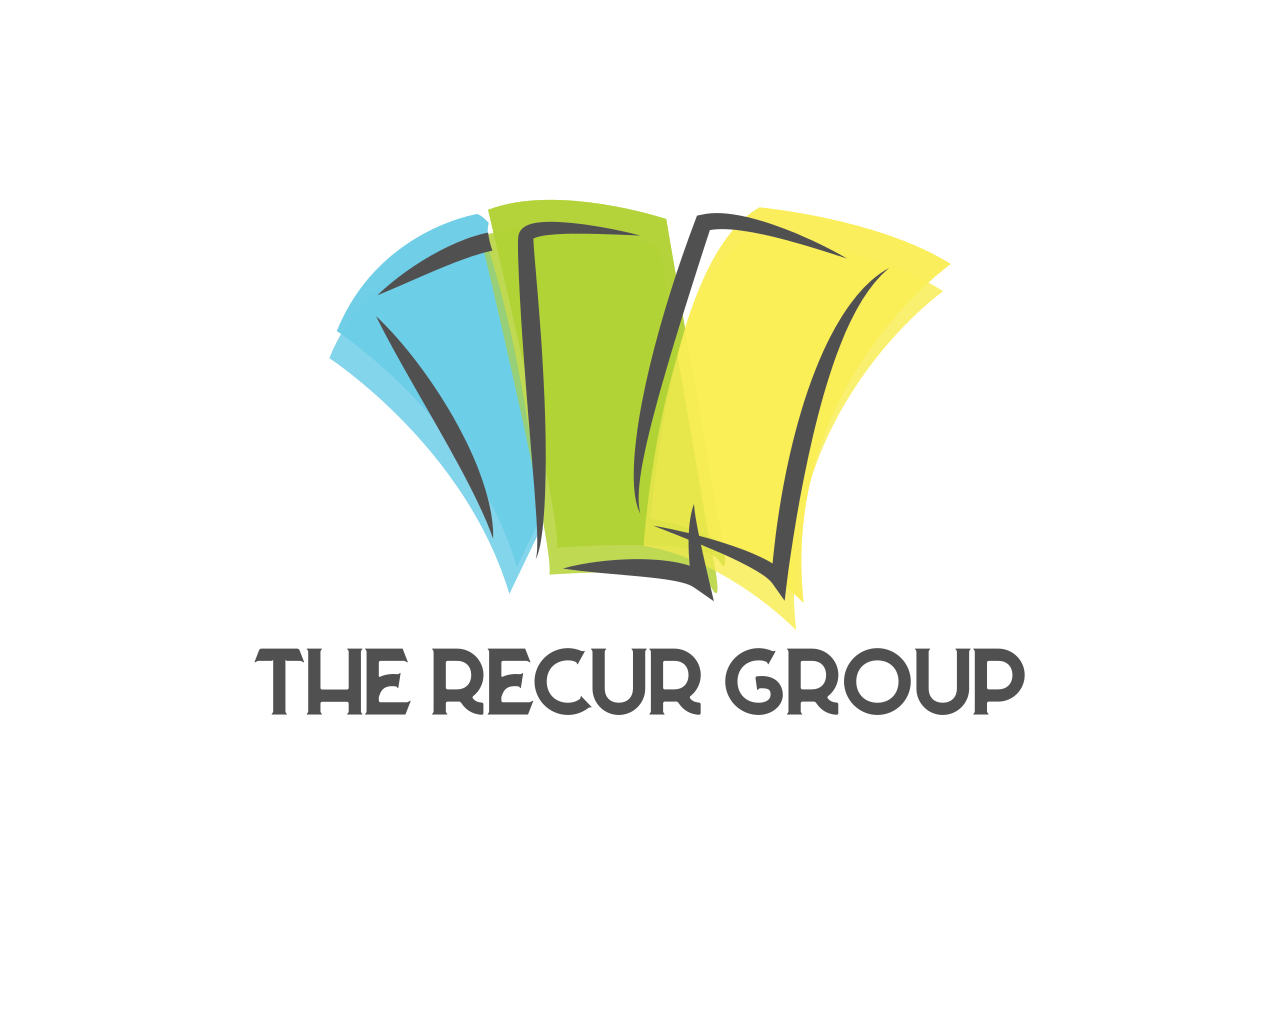 The Recur Group